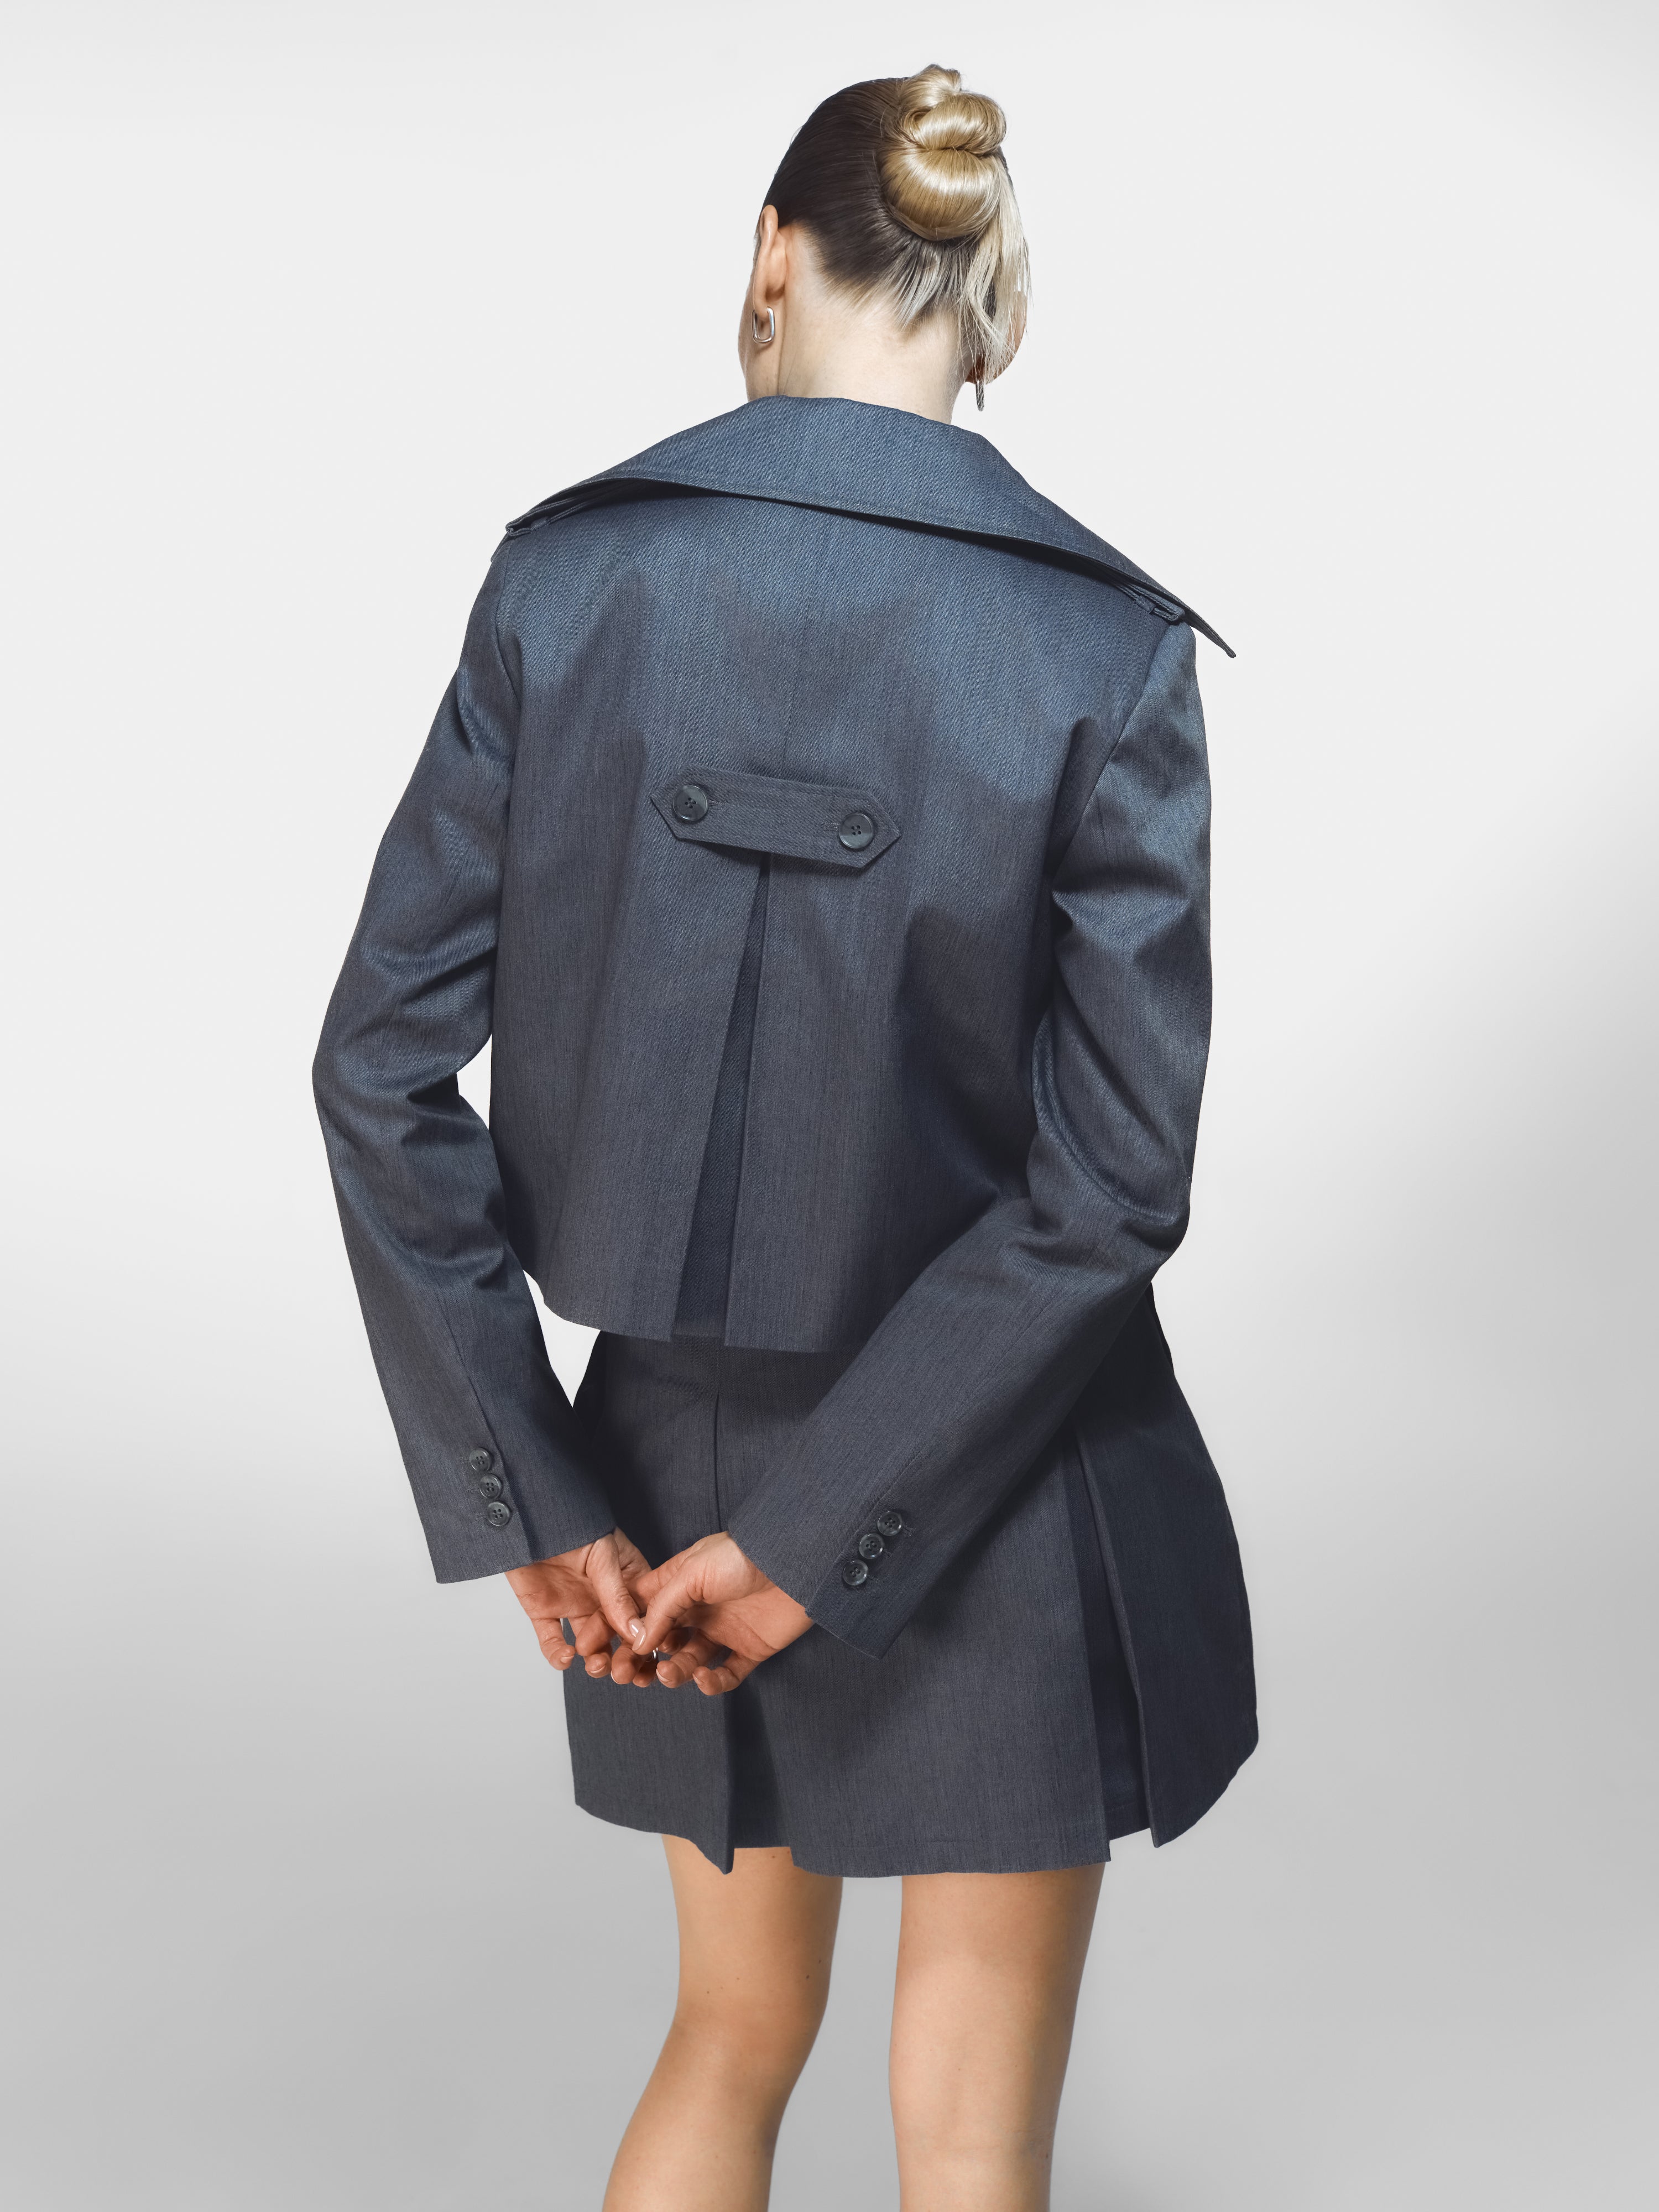 A model posing showing the back details of the SeaSycle jacket and mini skirt by HER CIPHER in color Graffite